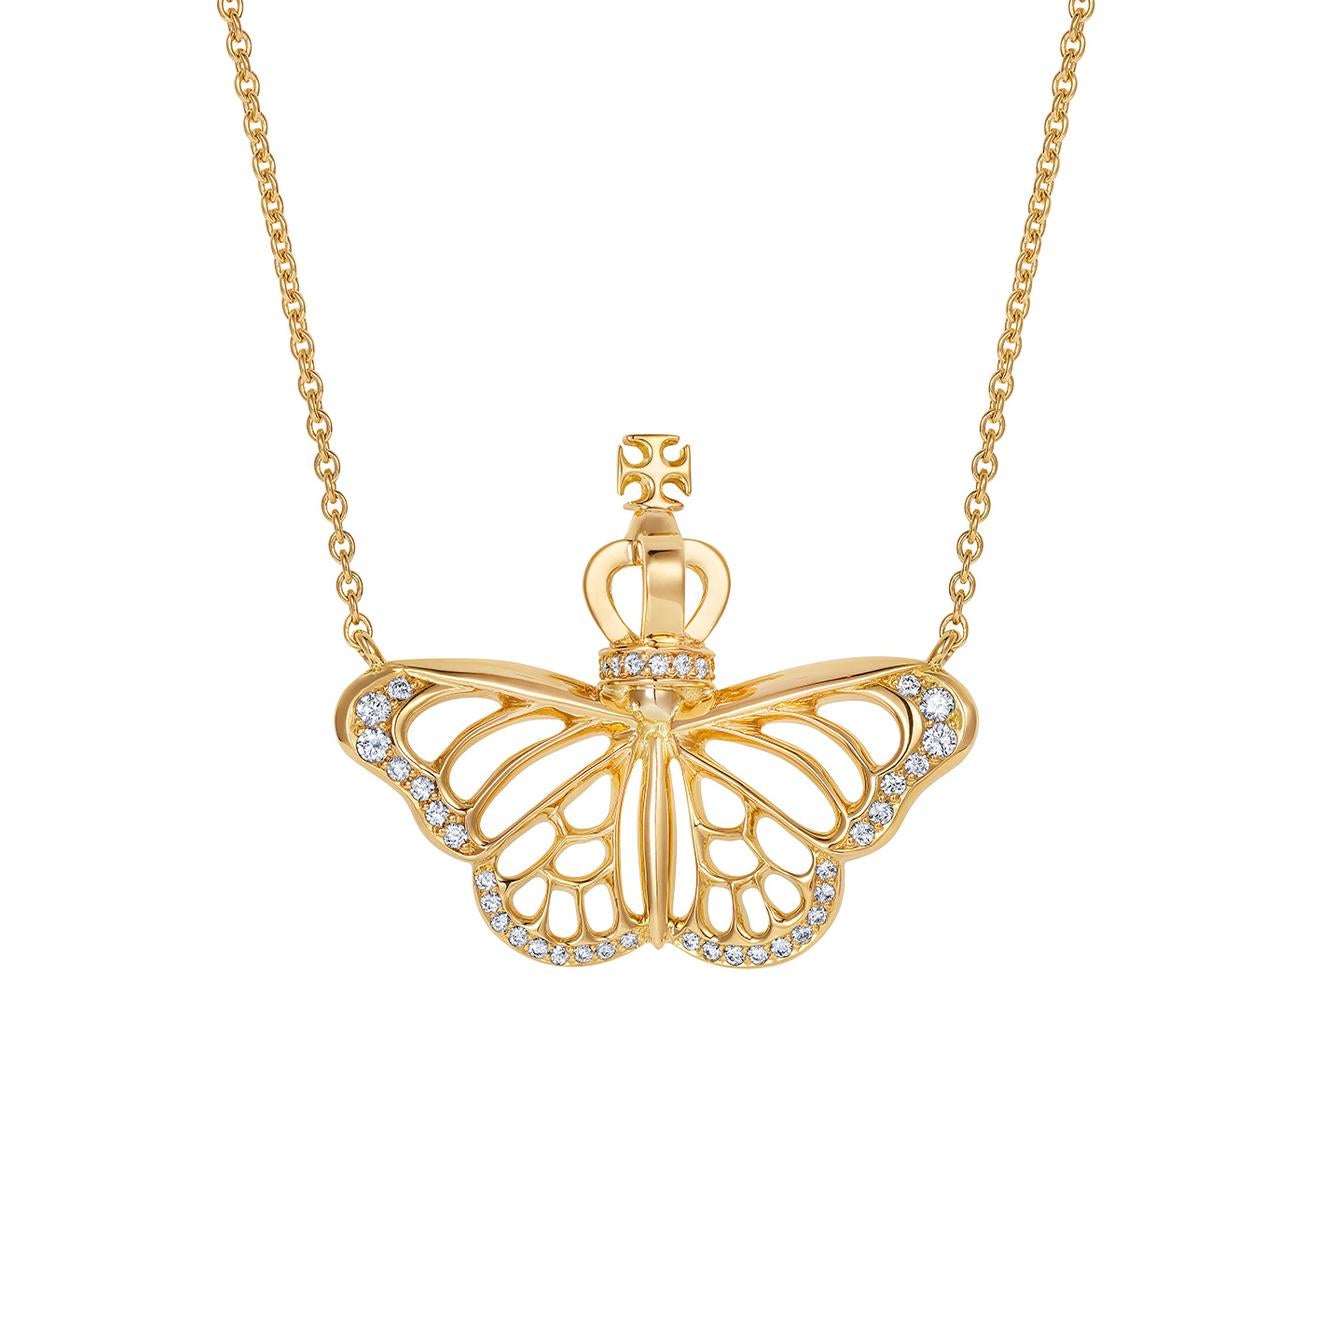 We're delighted to have created a very special Monarch Butterfly pendant in 18K yellow gold with a total diamond weight of 0.15 carats – complete with a wonderfully small and intricate crown, of course!

Symbolising hope and new beginnings